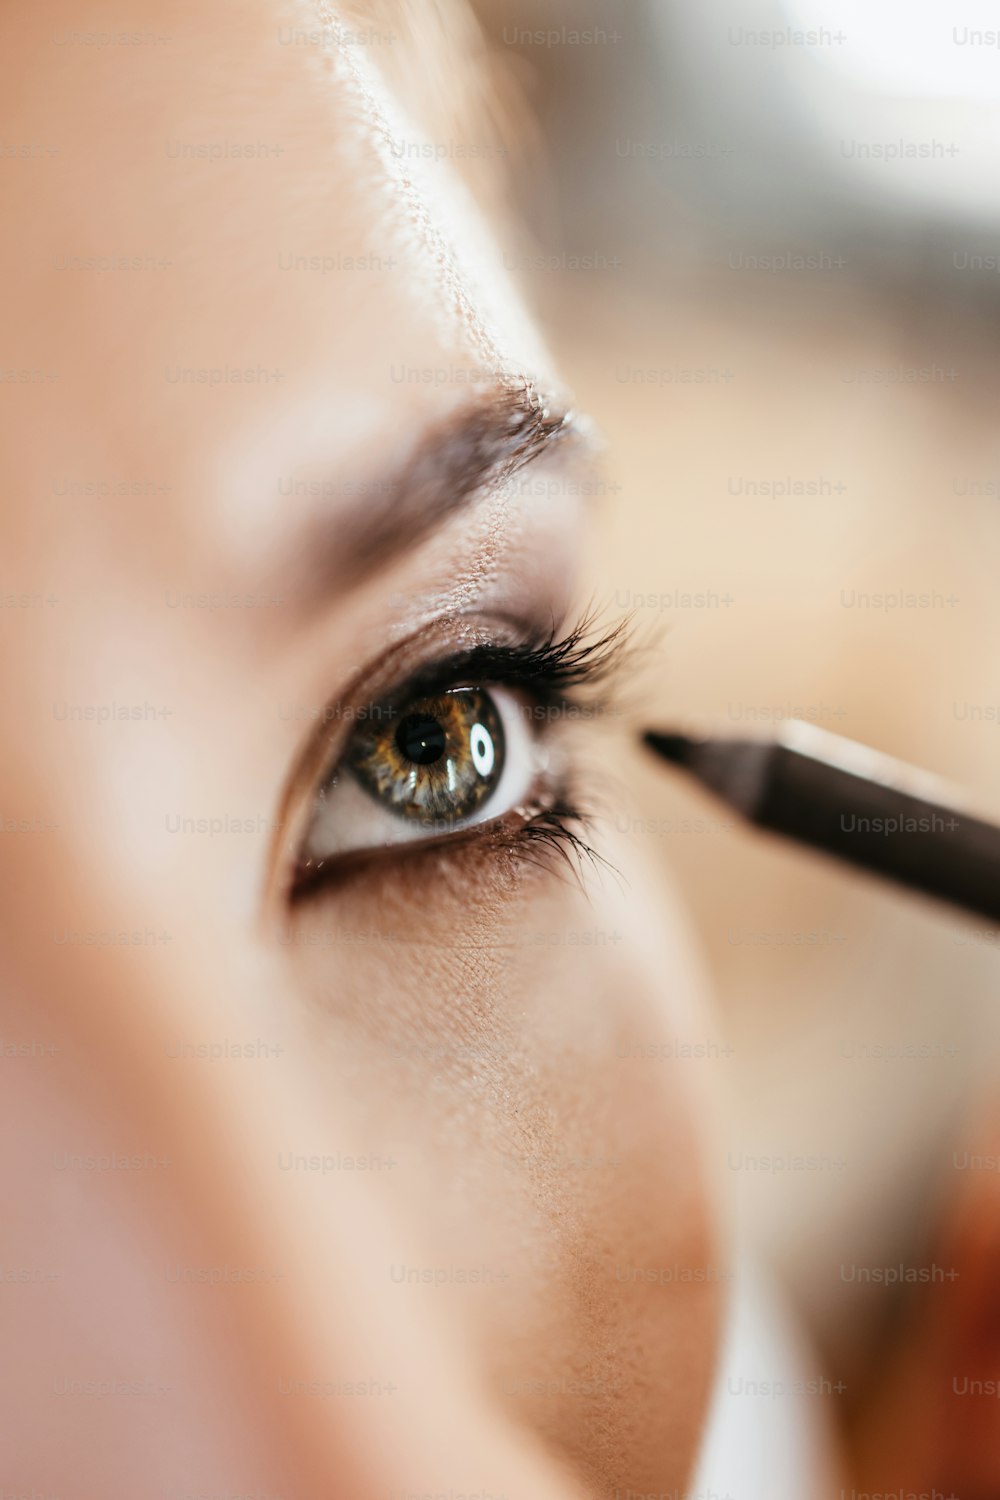 Makeup process. Professional artist applying make up on model face and eye. Extreme close up macro shot of beautiful woman's eye. Short depth of field.